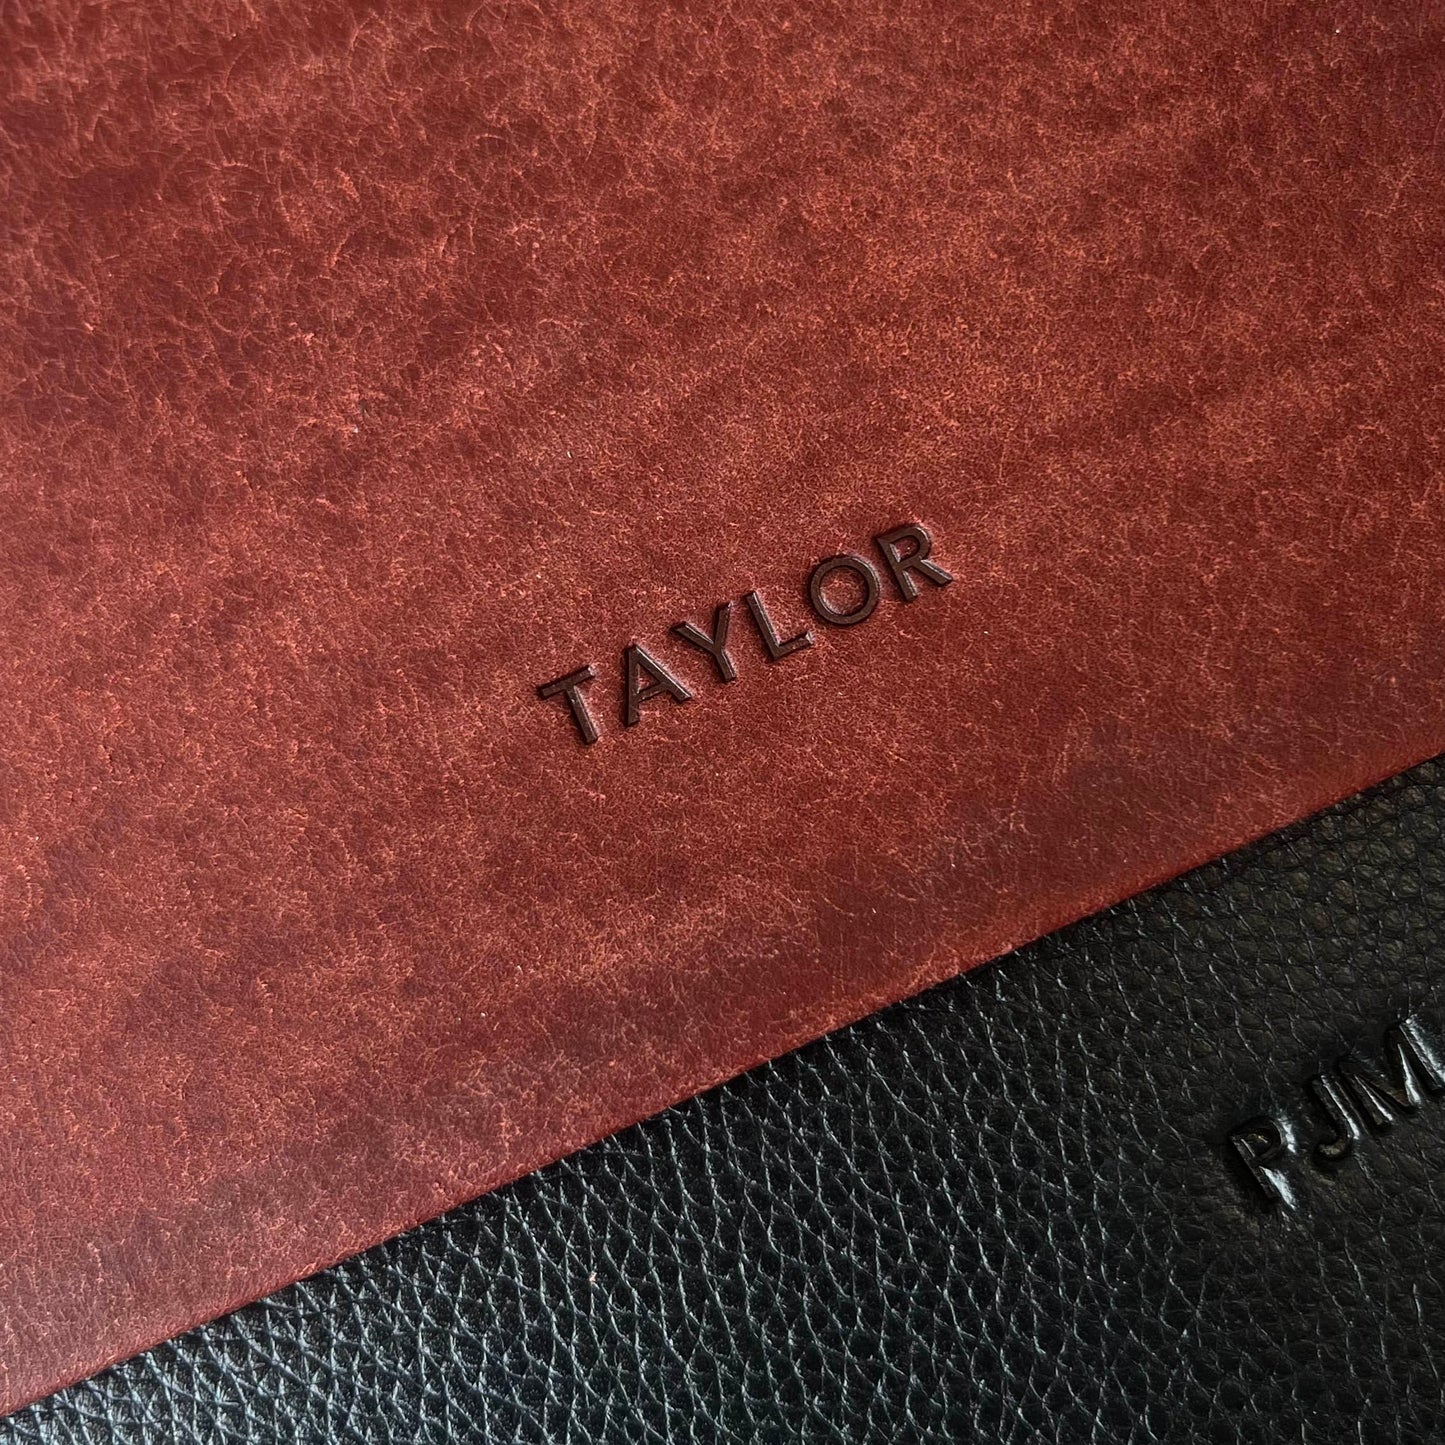 Personalize the laptop case with you initials to add a touch of warmth